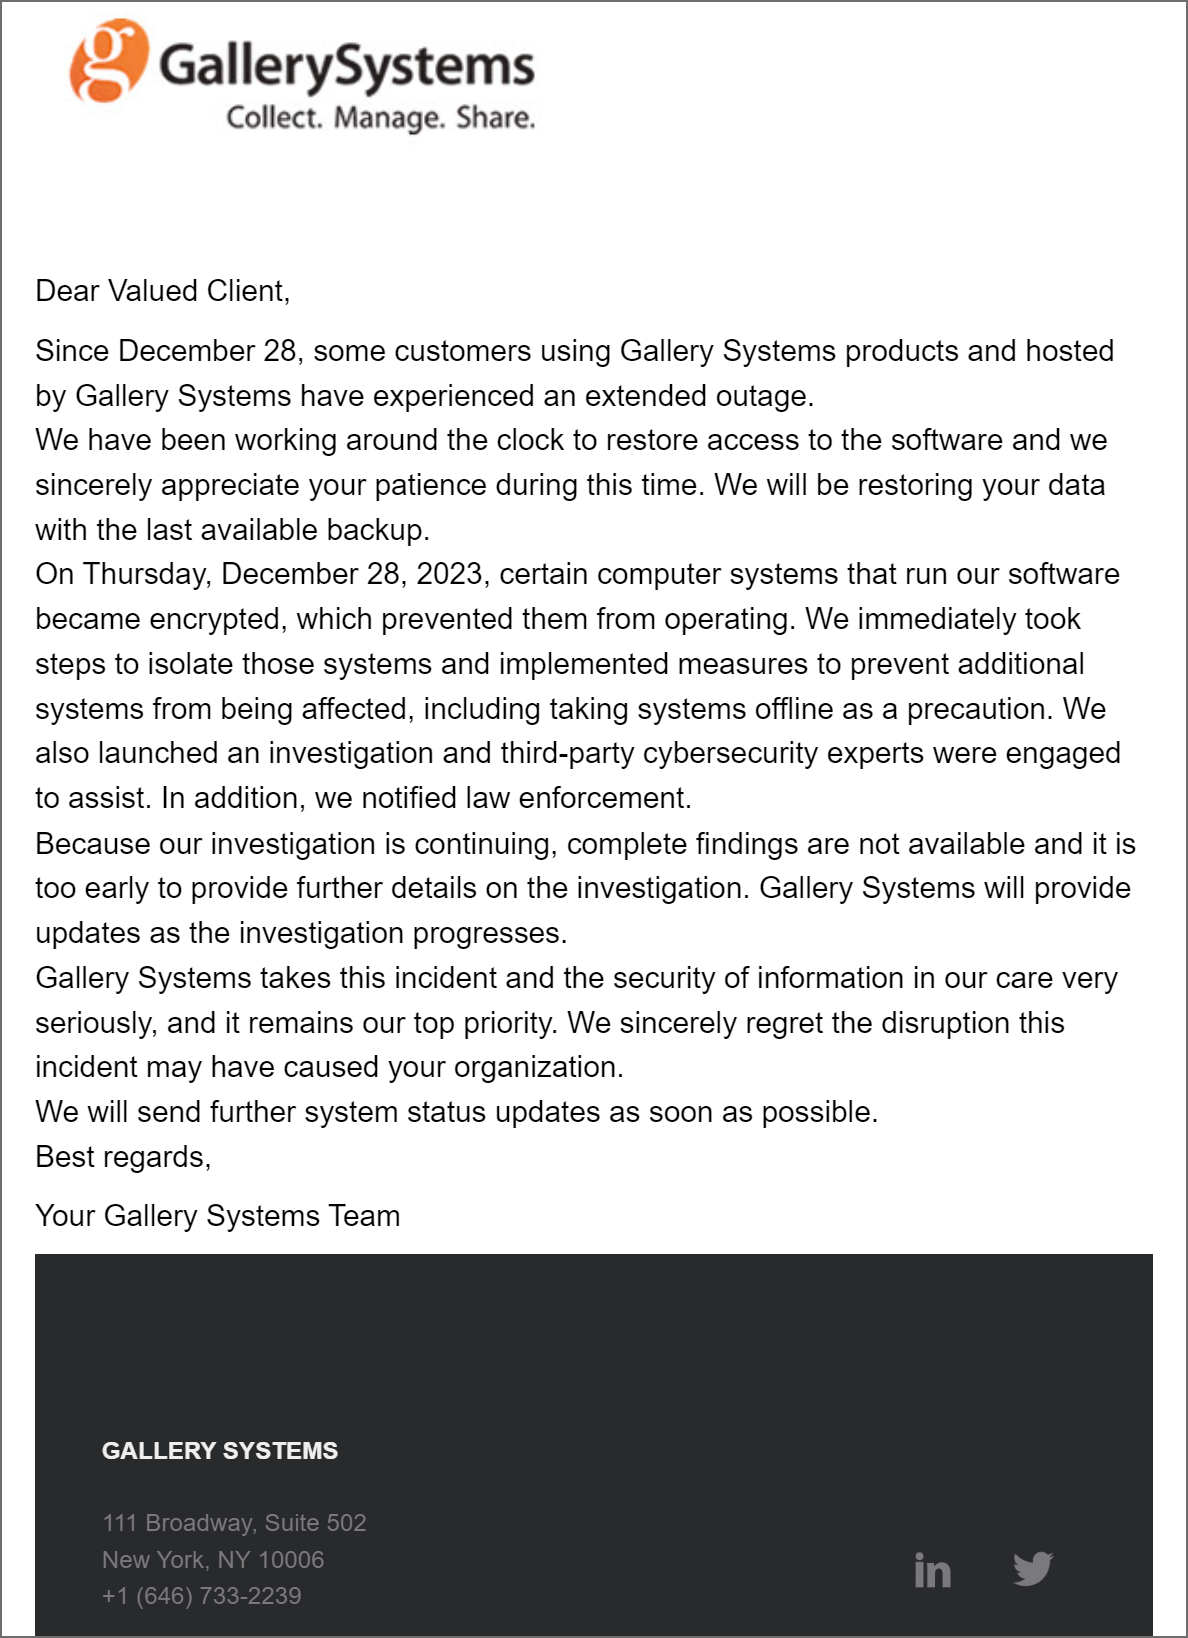 Gallery Systems statement following the cyber attack